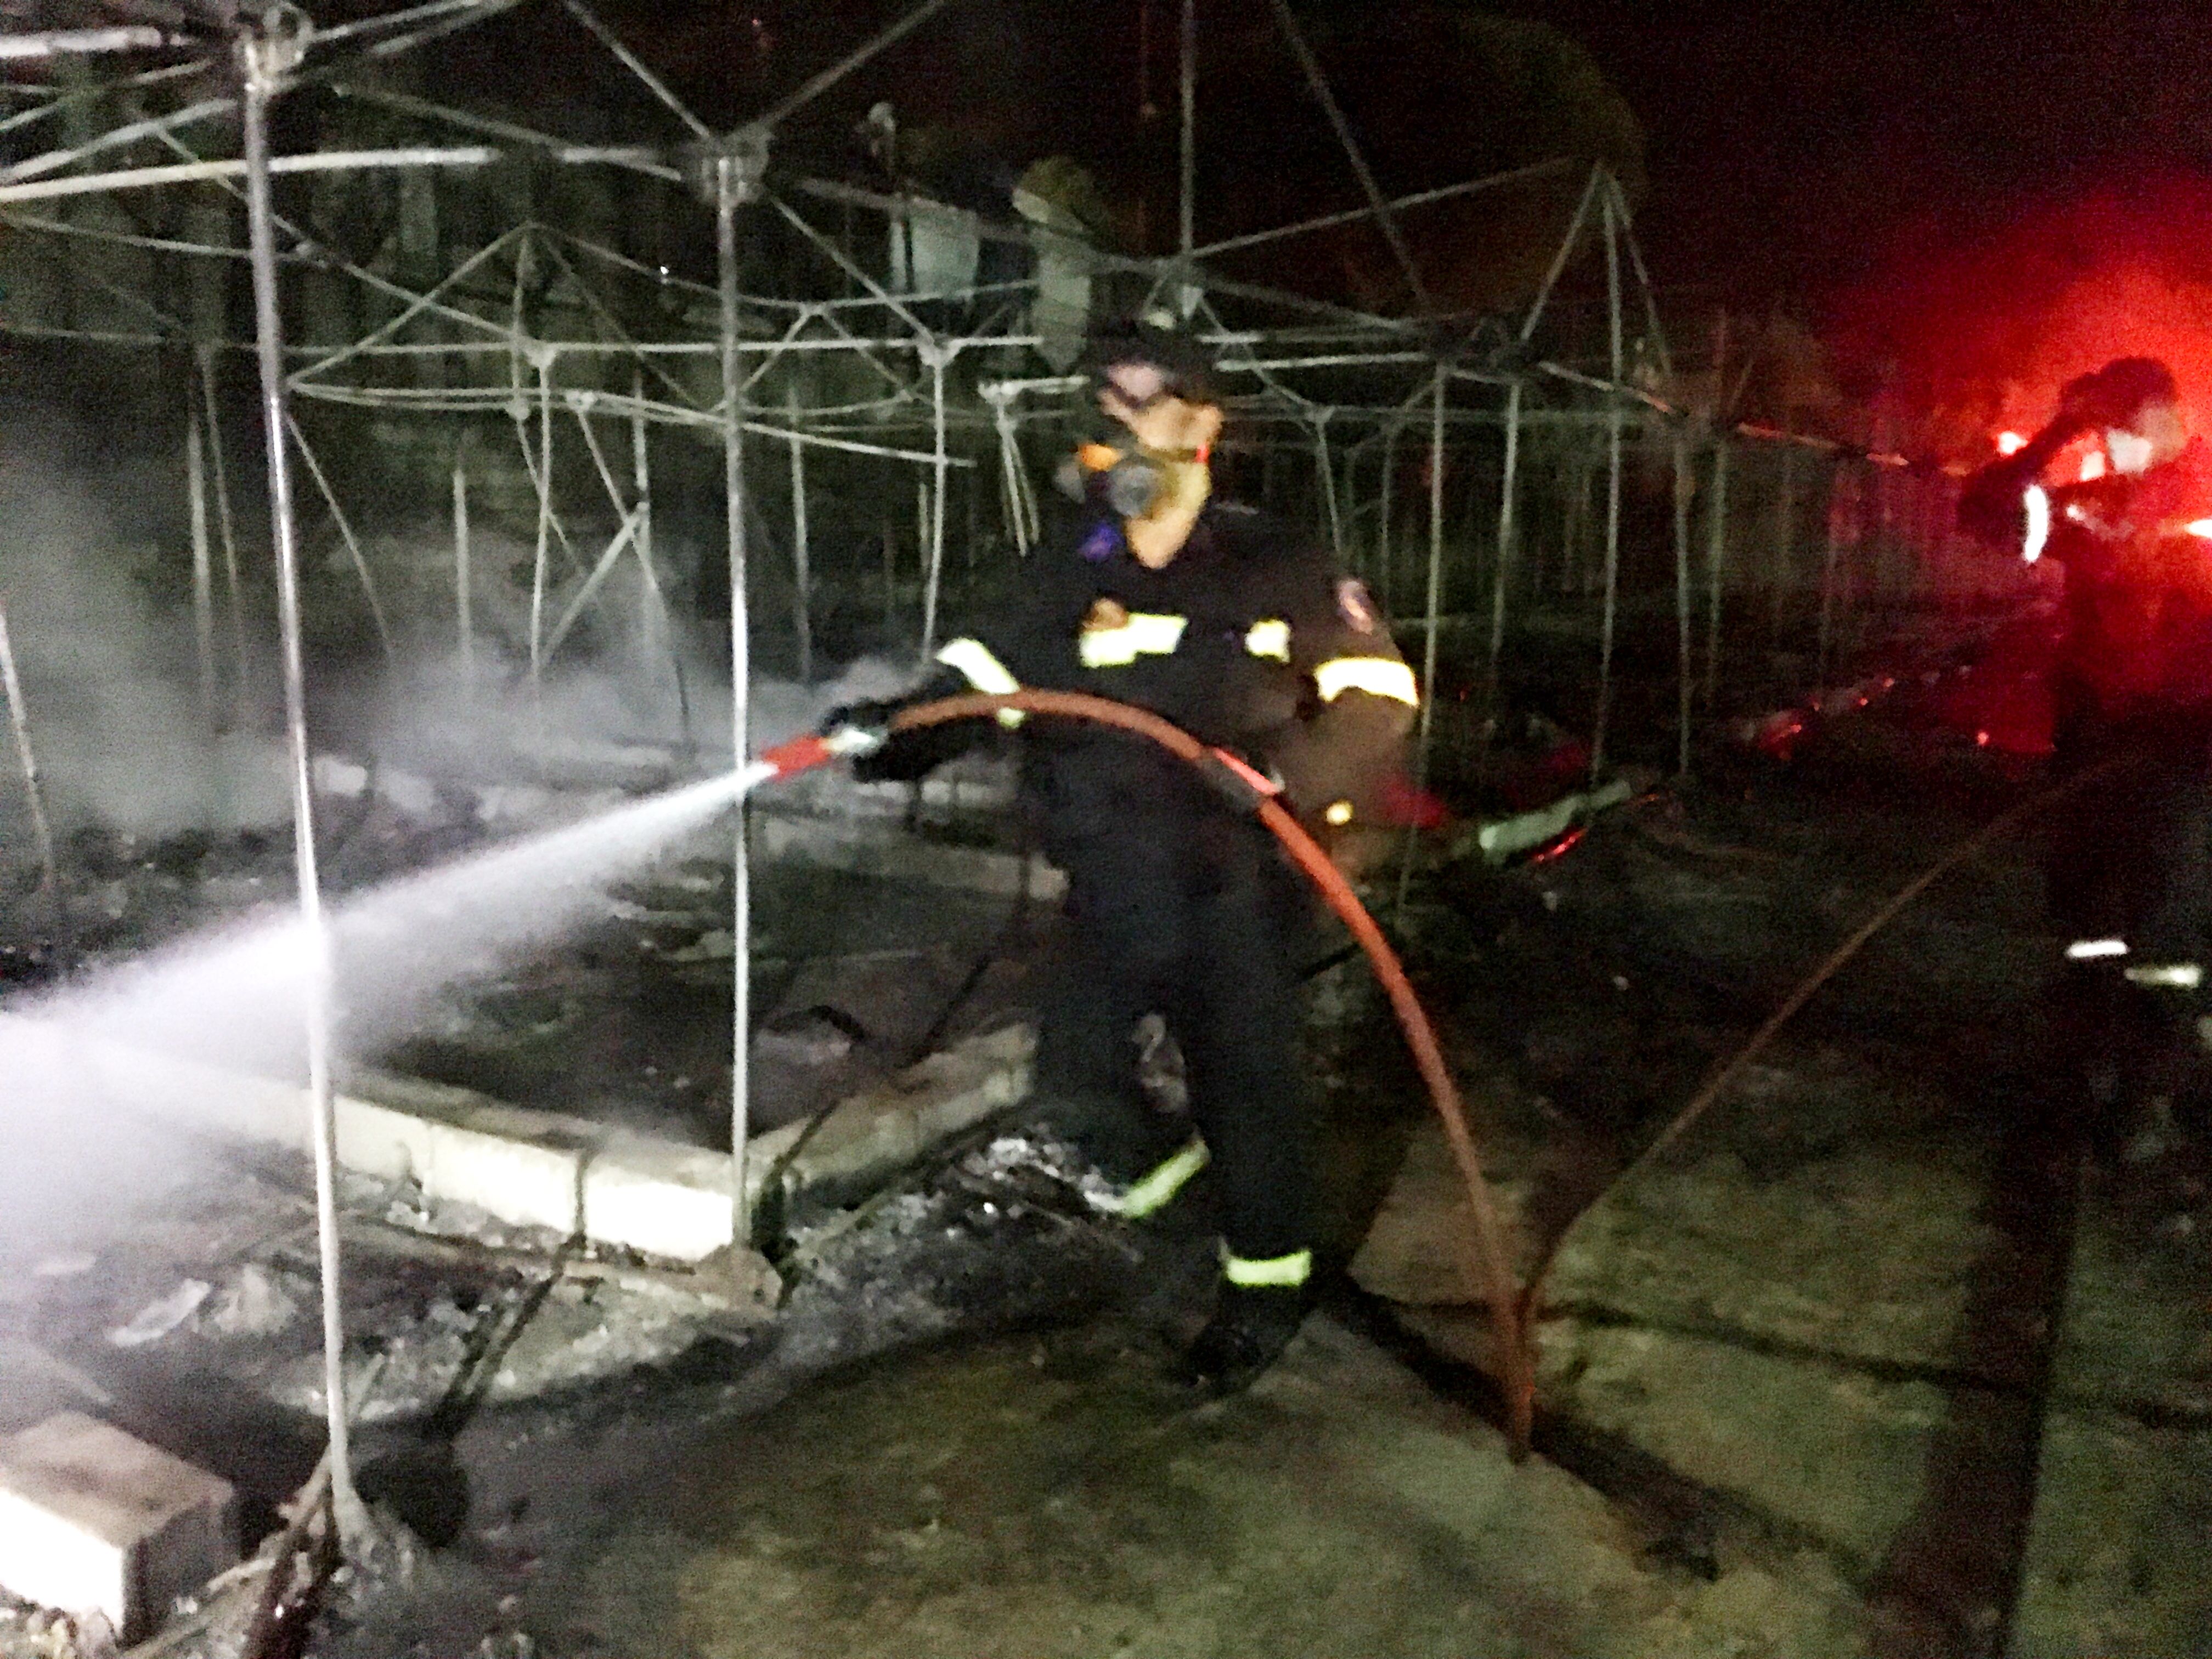 A fireman douses the flames among burned tents at Moria camp after a fire that ripped through tents and destroyed containers during violence among residents. Image by Jeanne Carstensen. Lesbos, Greece, 2016.